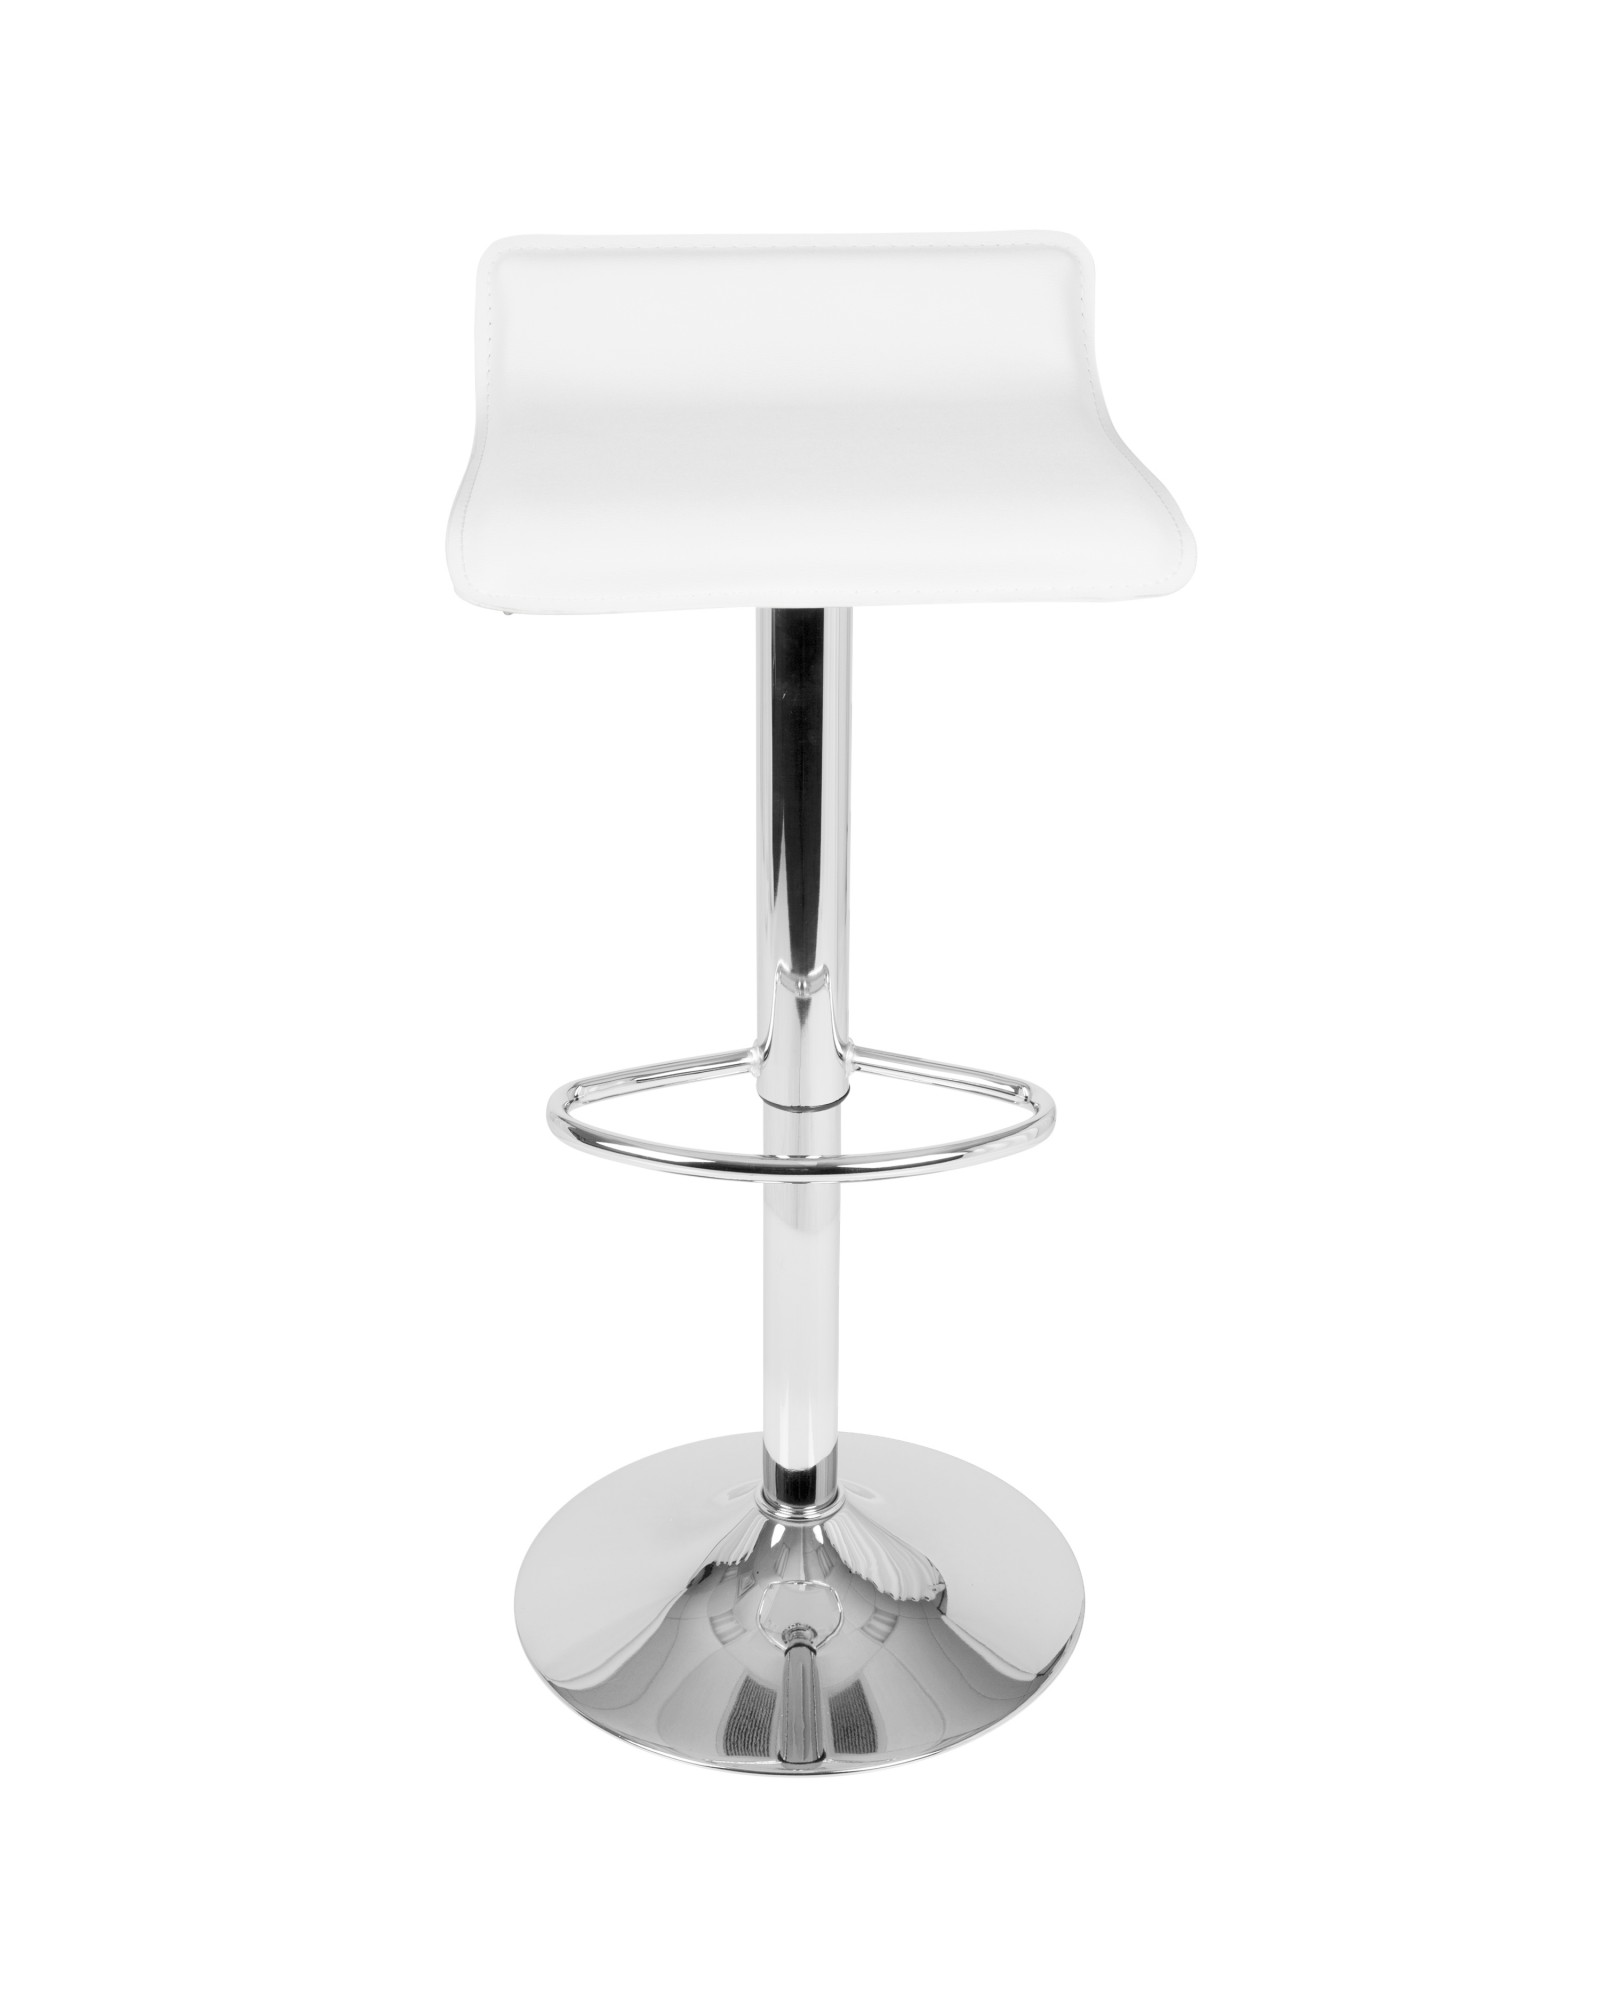 Ale Contemporary Adjustable Barstool in White PU Leather - Set of 2